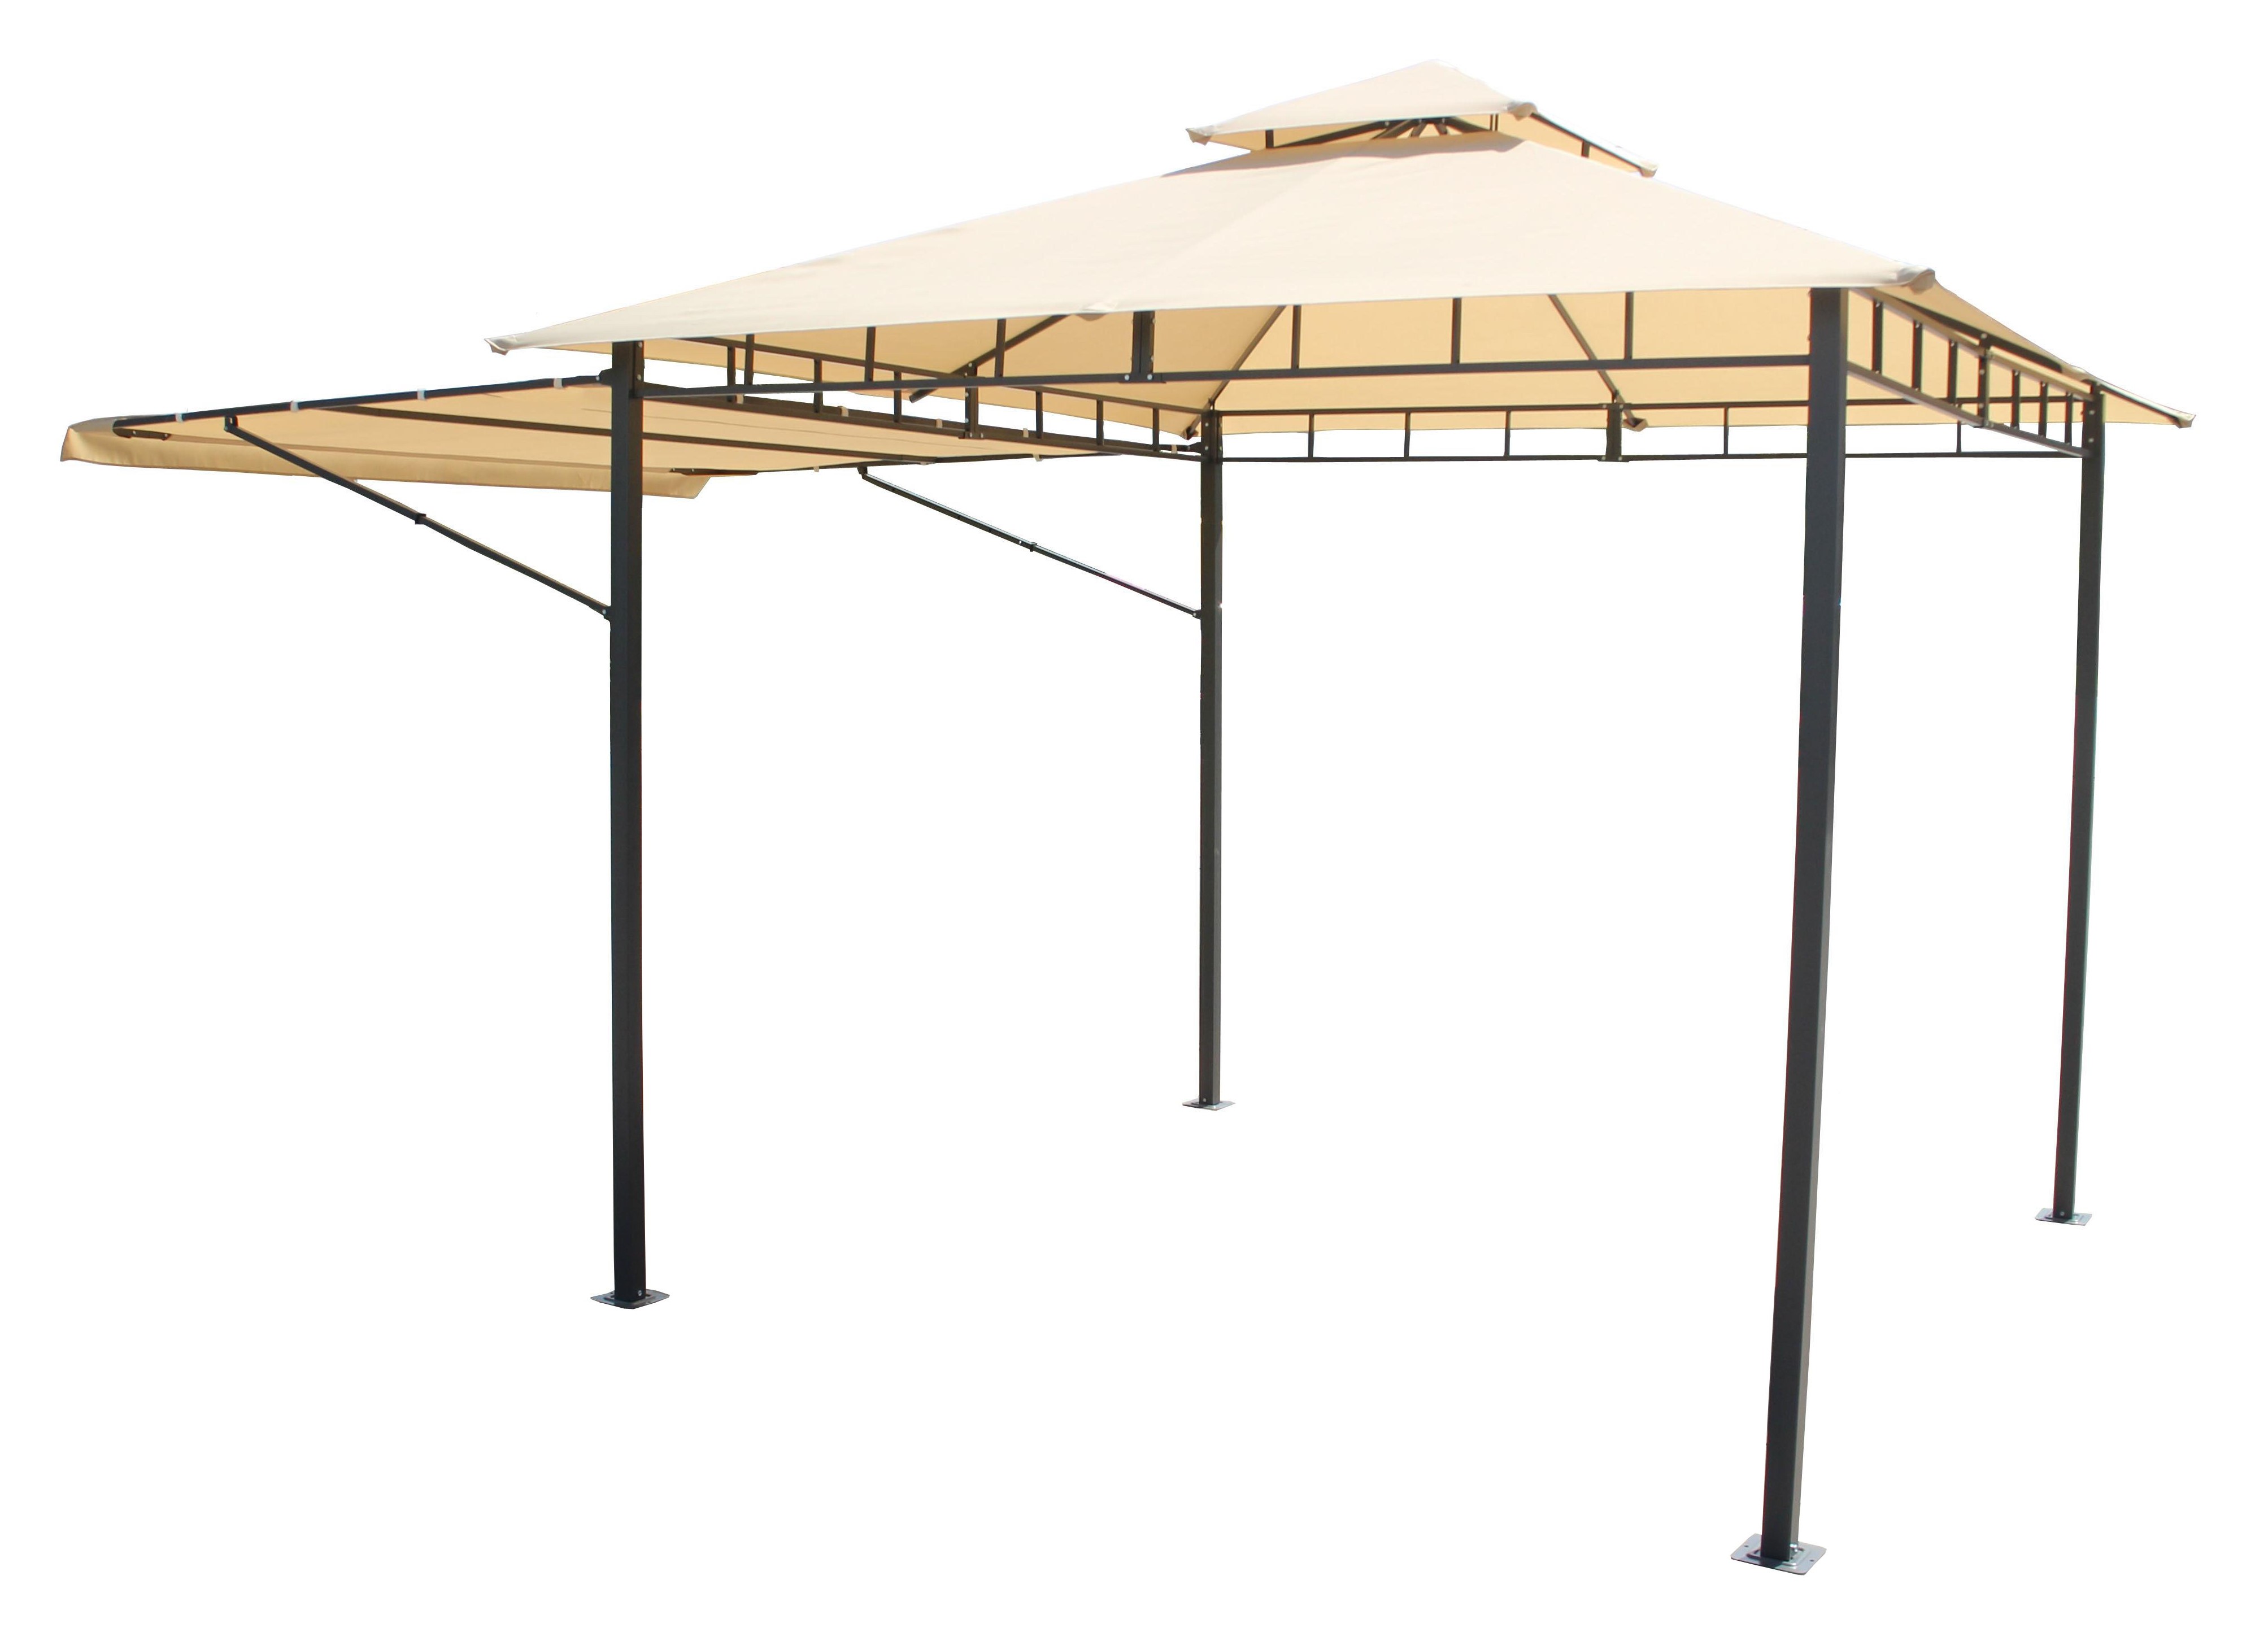 ROOF COVER FOR MOON METAL GAZEBO 3X3M